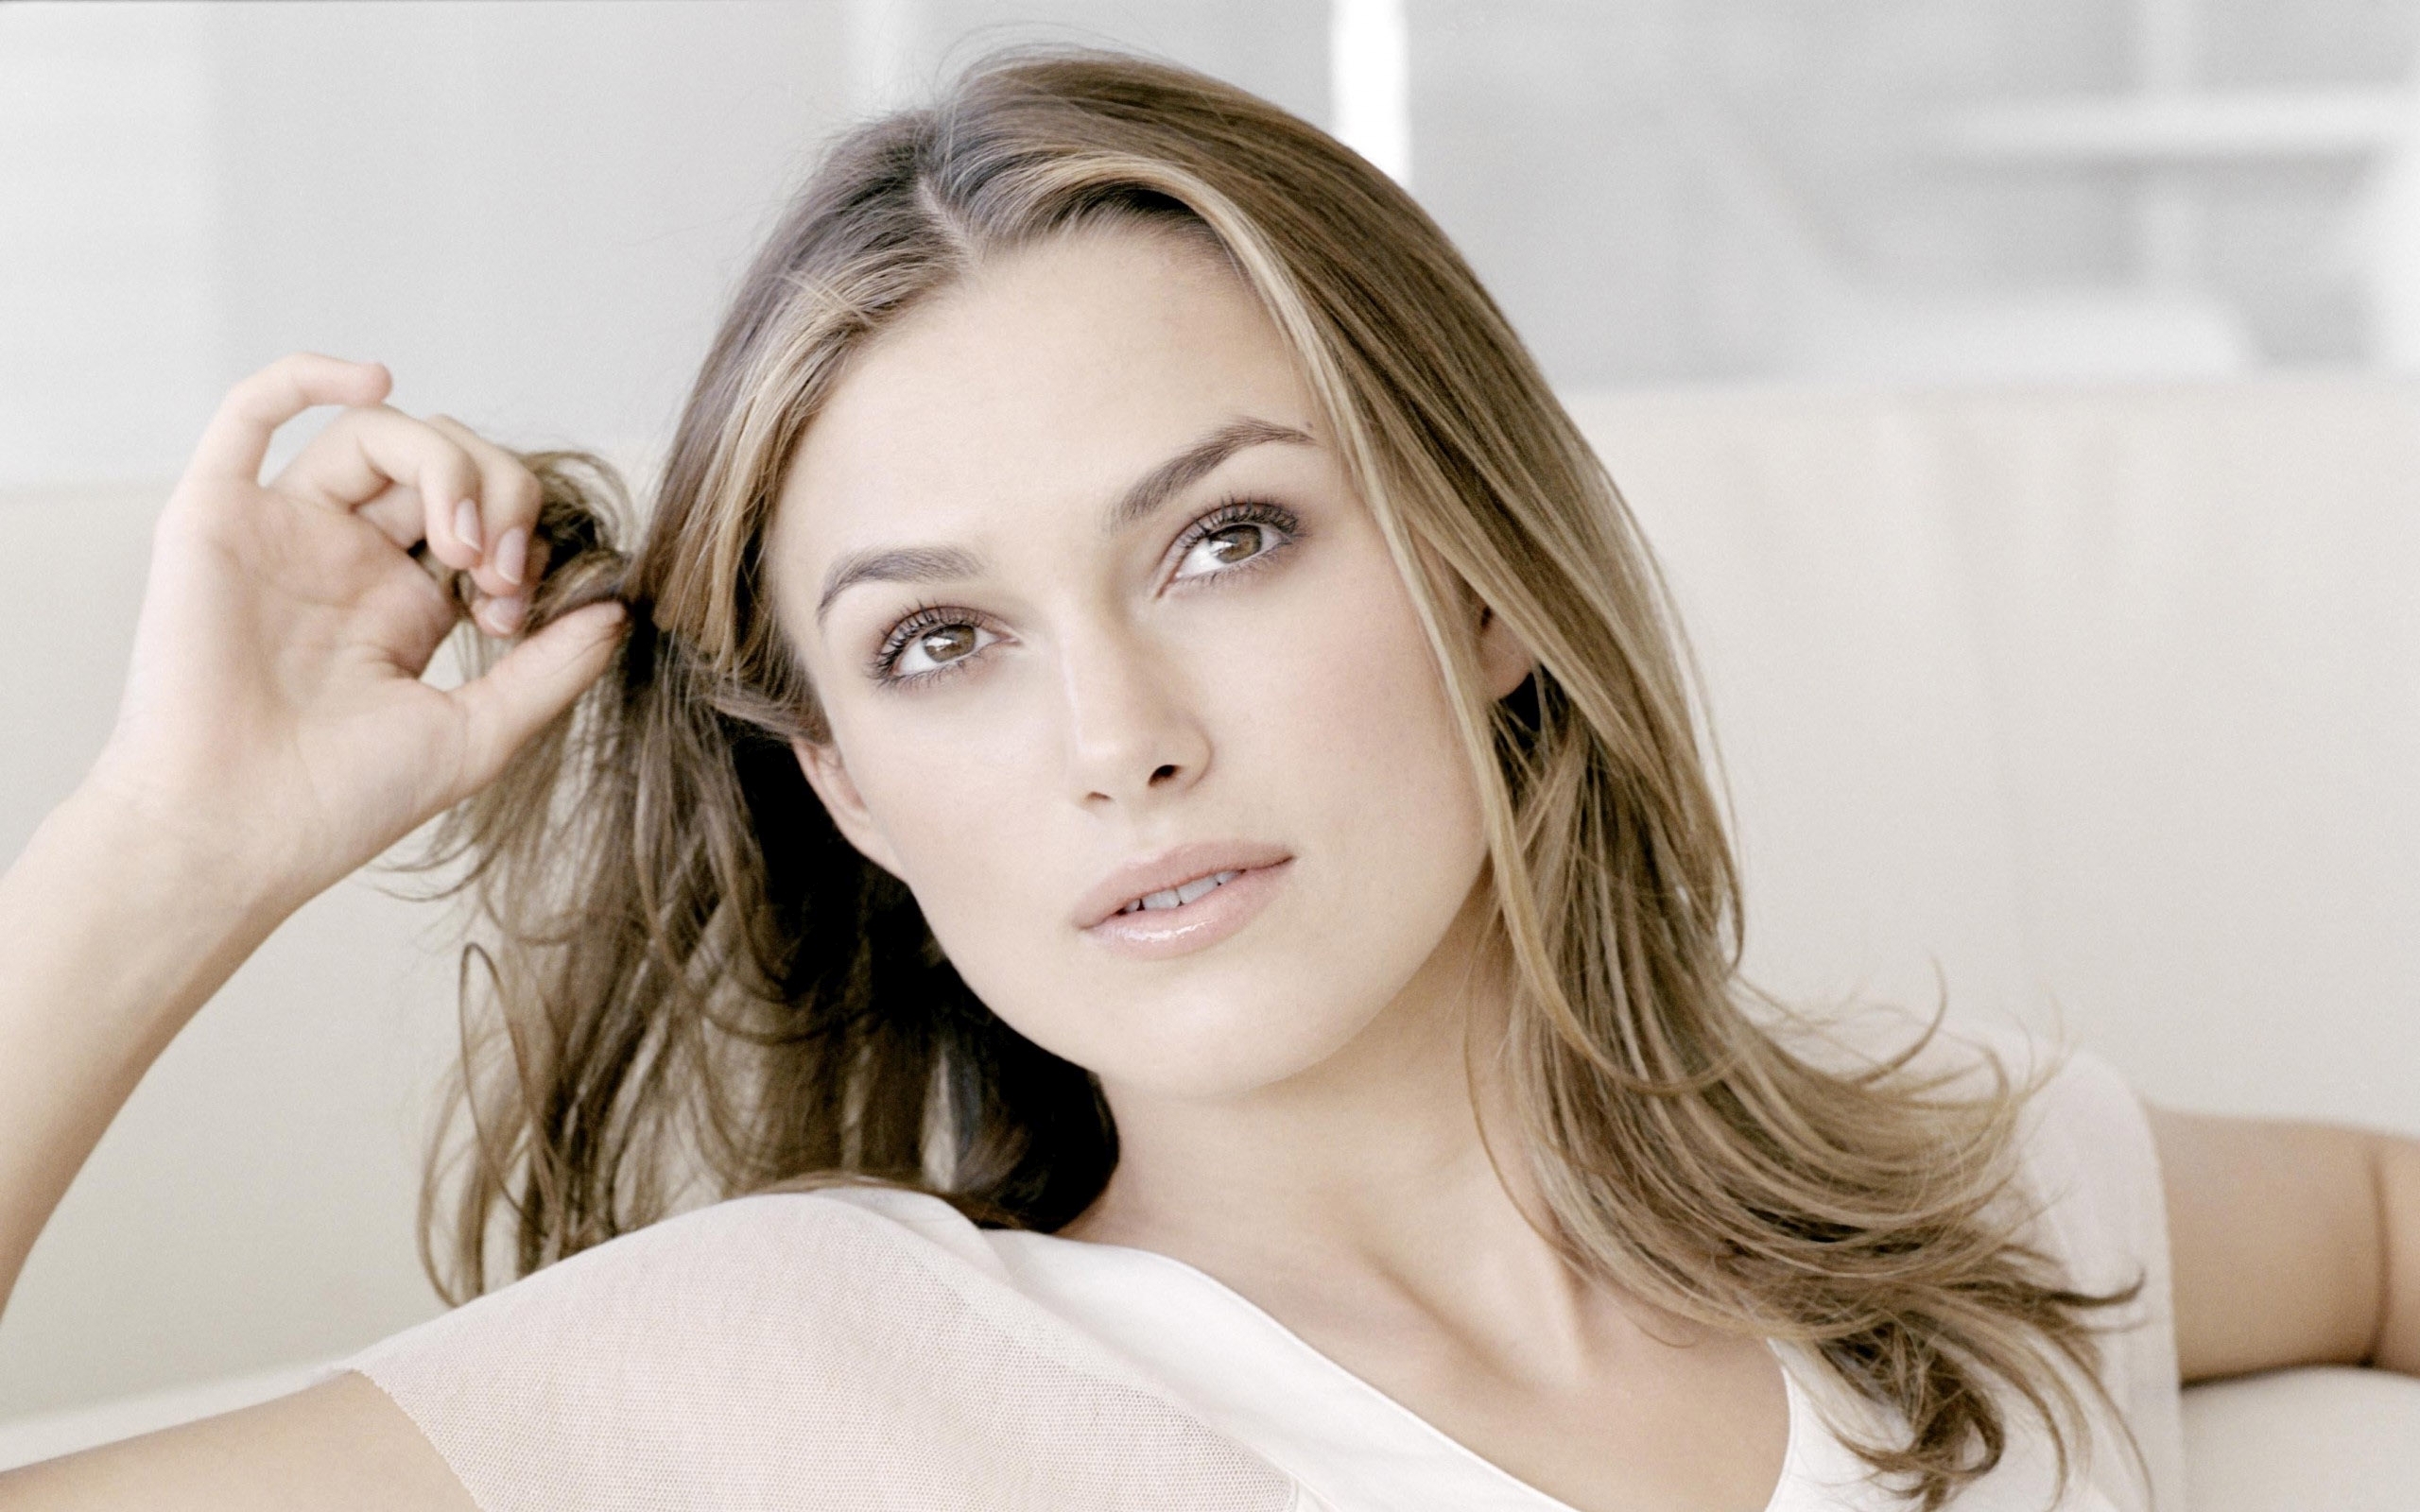 keira knightley hd wallpapers,hair,face,skin,hairstyle,eyebrow